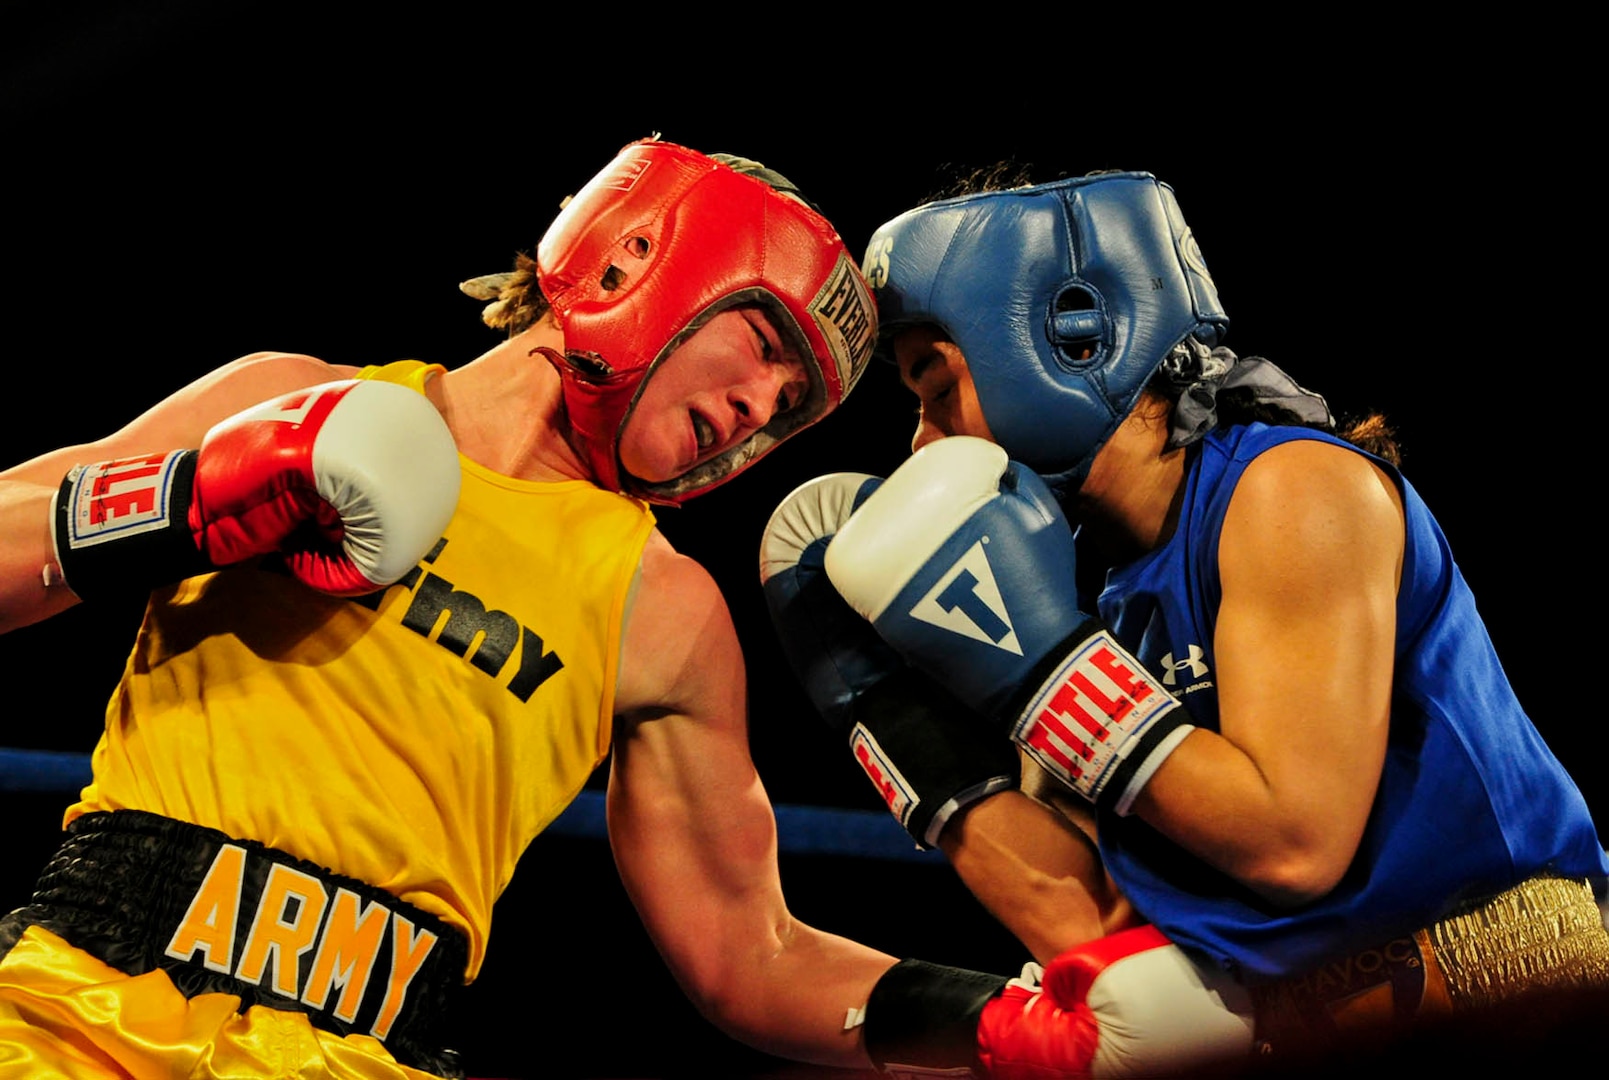 Army rules in finals of 2011 Armed Forces Boxing Championshipsu003e Joint Base San Antoniou003e News